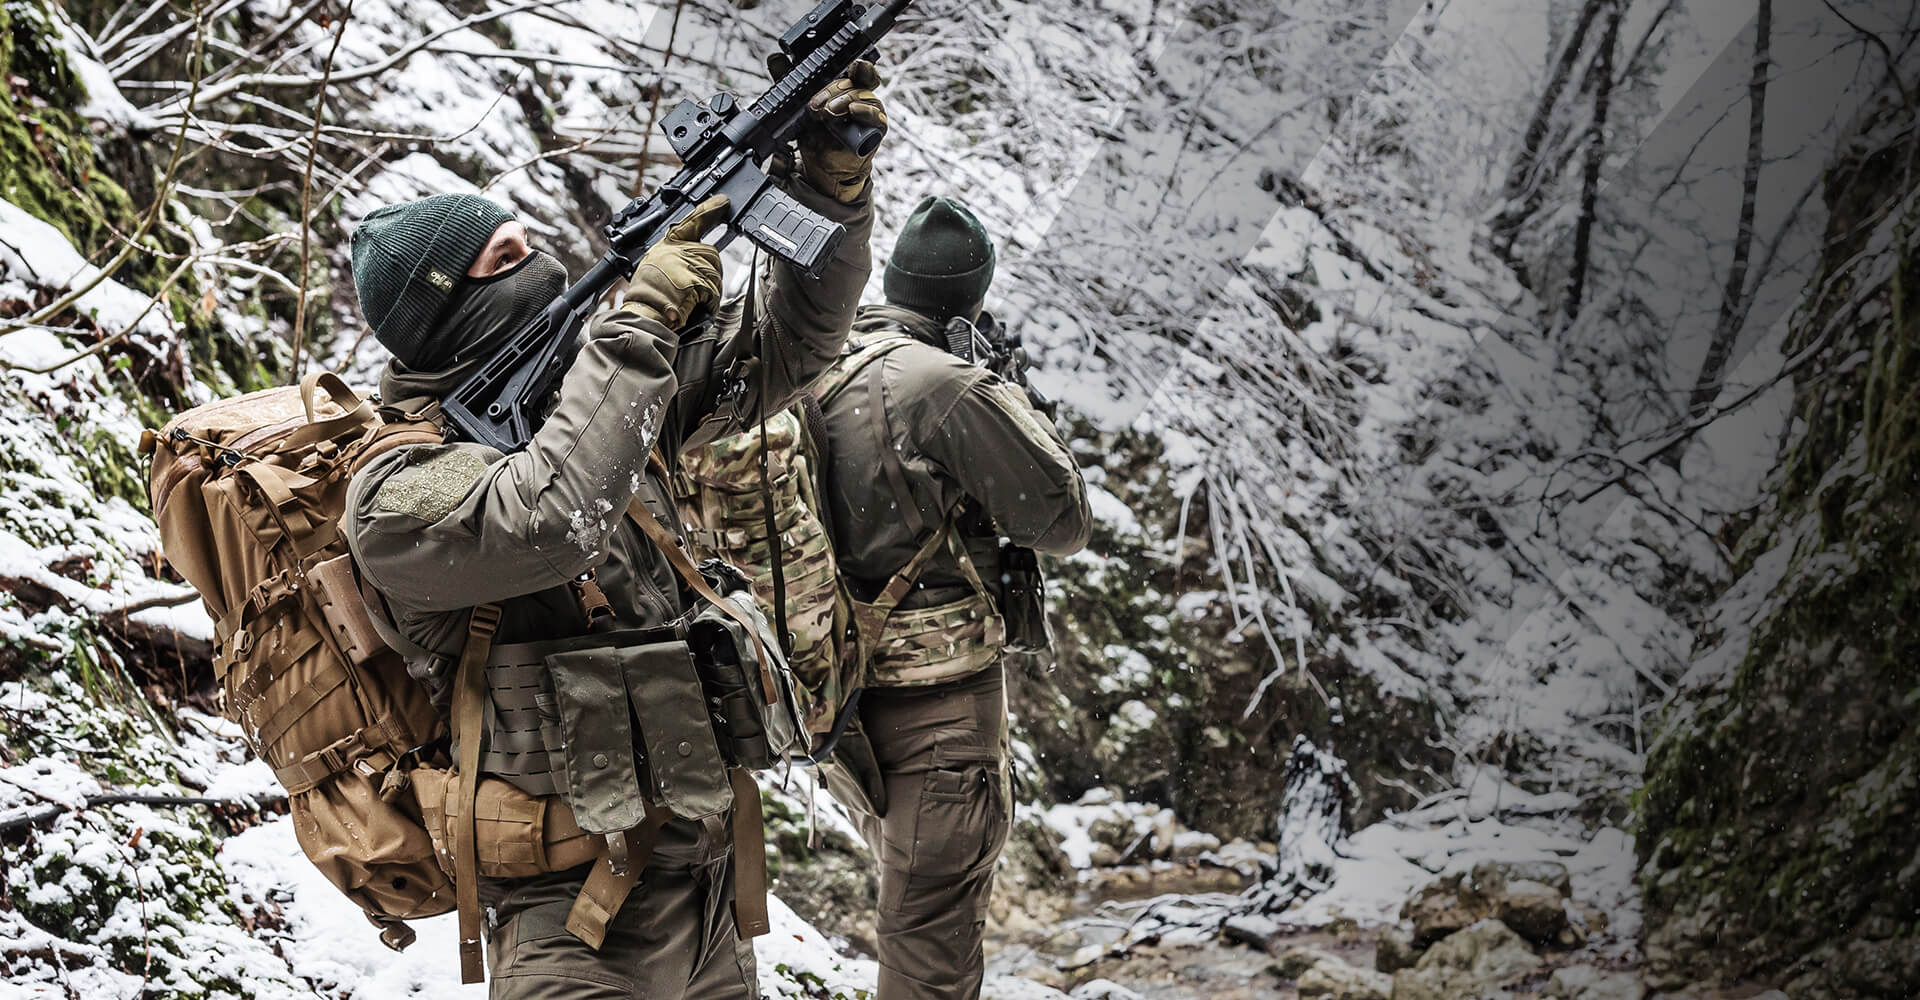 Tactical Gear Australia on X: Feeling the cold? Whatever the